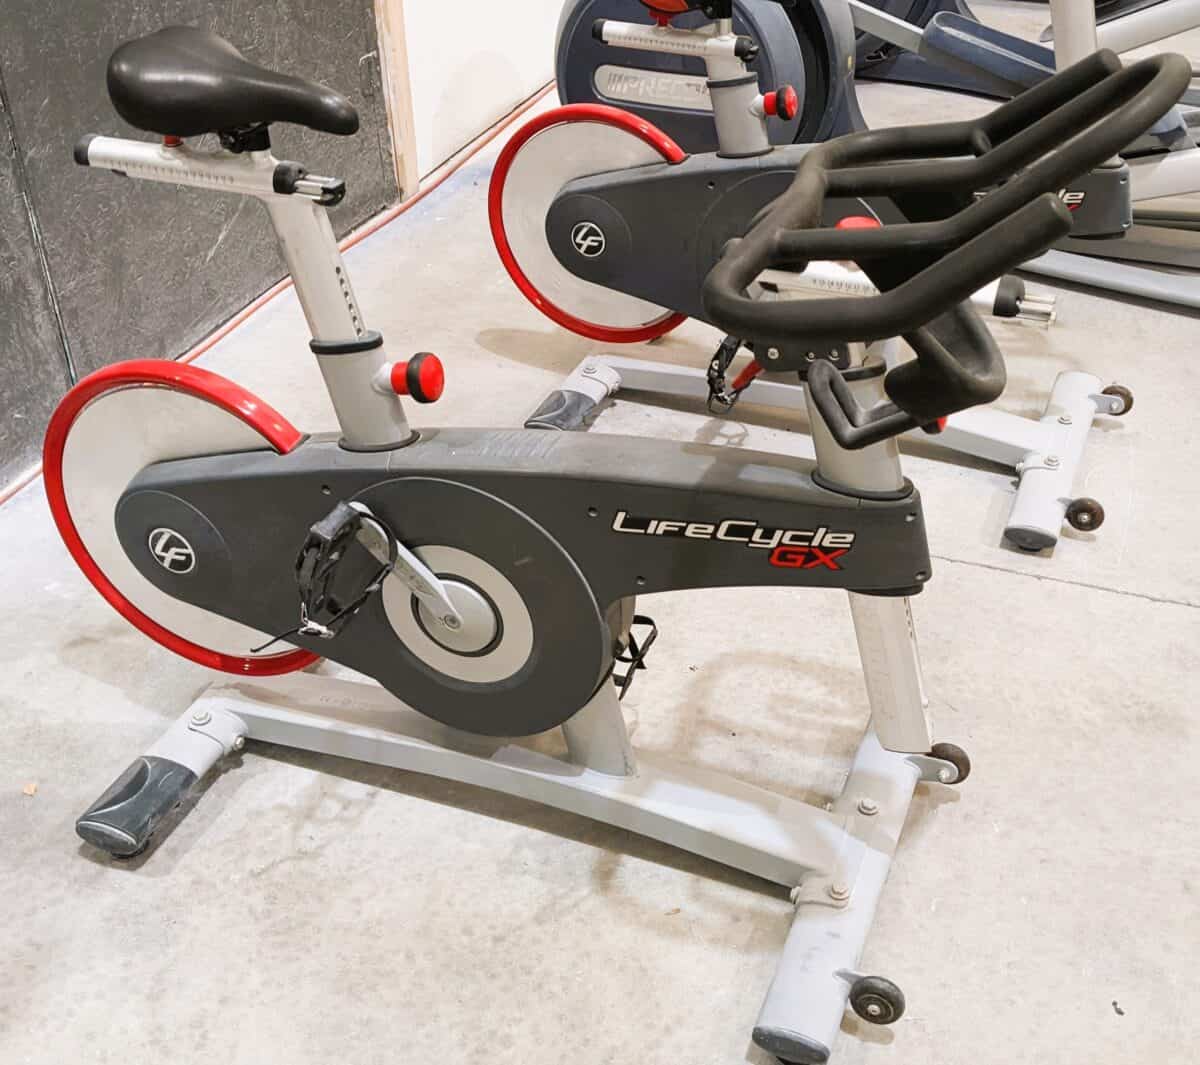 Best Exercise Bike Without a Subscription